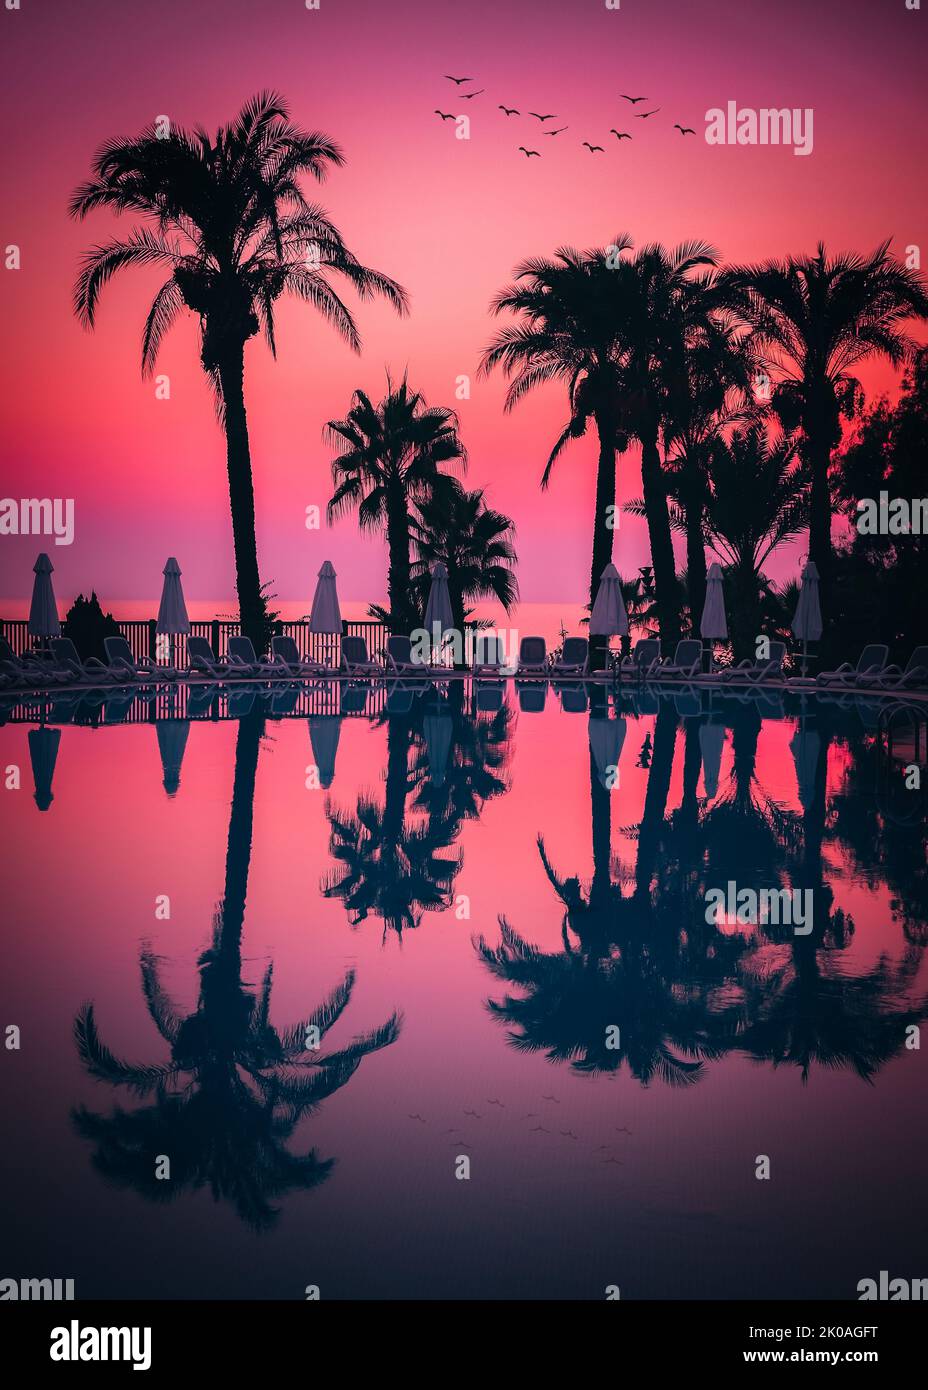 Silhouette of palm trees at the resort pool on pink, purple, violett sunset sky, vertical image. Stock Photo